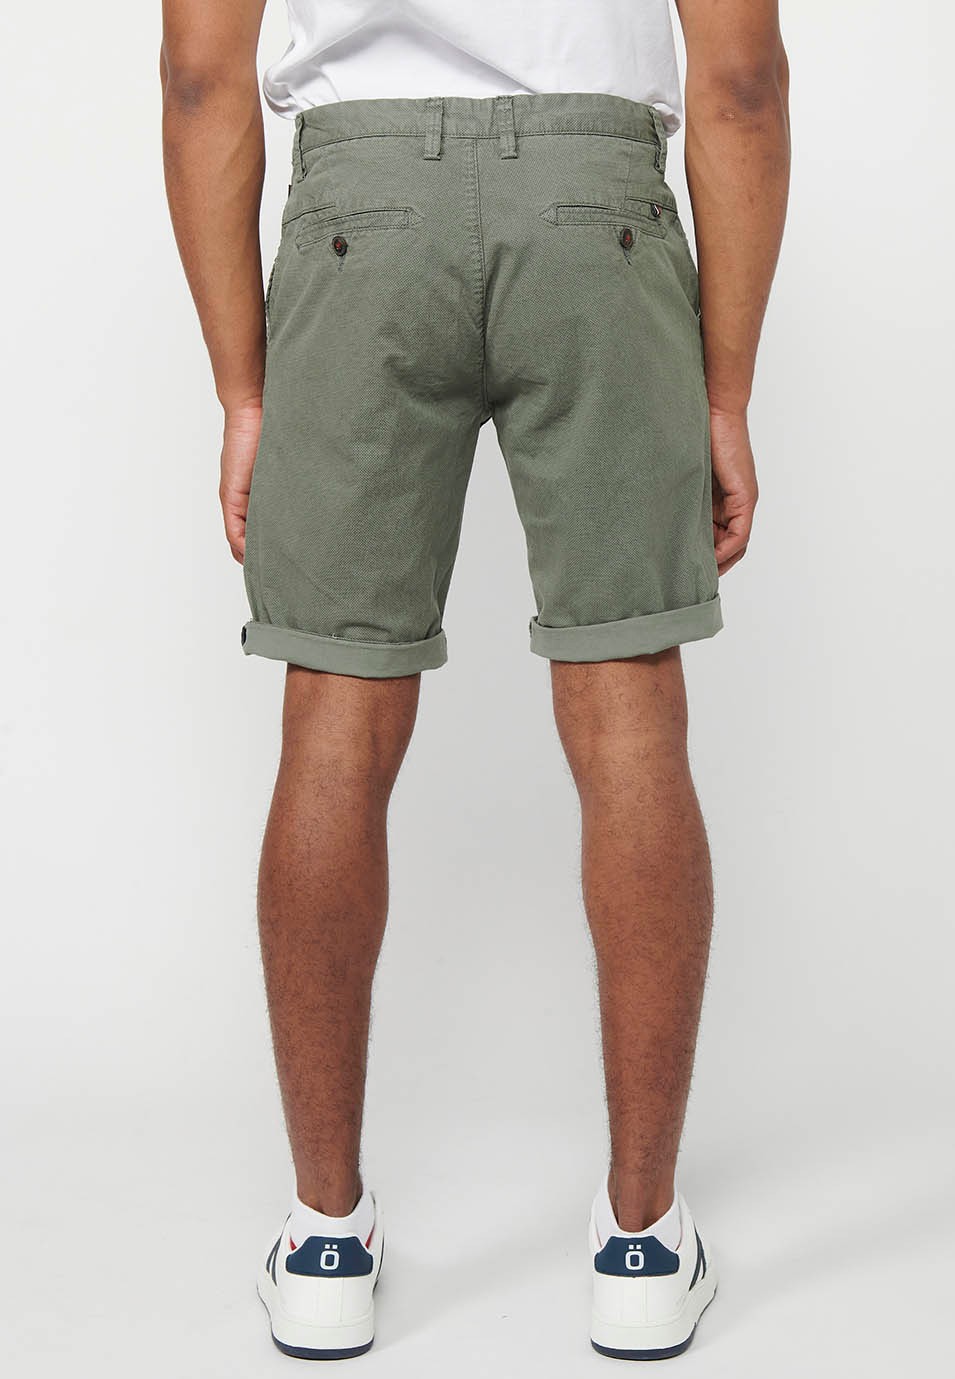 Bermuda Chino Shorts with Turn-Up Finish with Front Zipper and Button Closure with Four Pockets in Green Color for Men 4